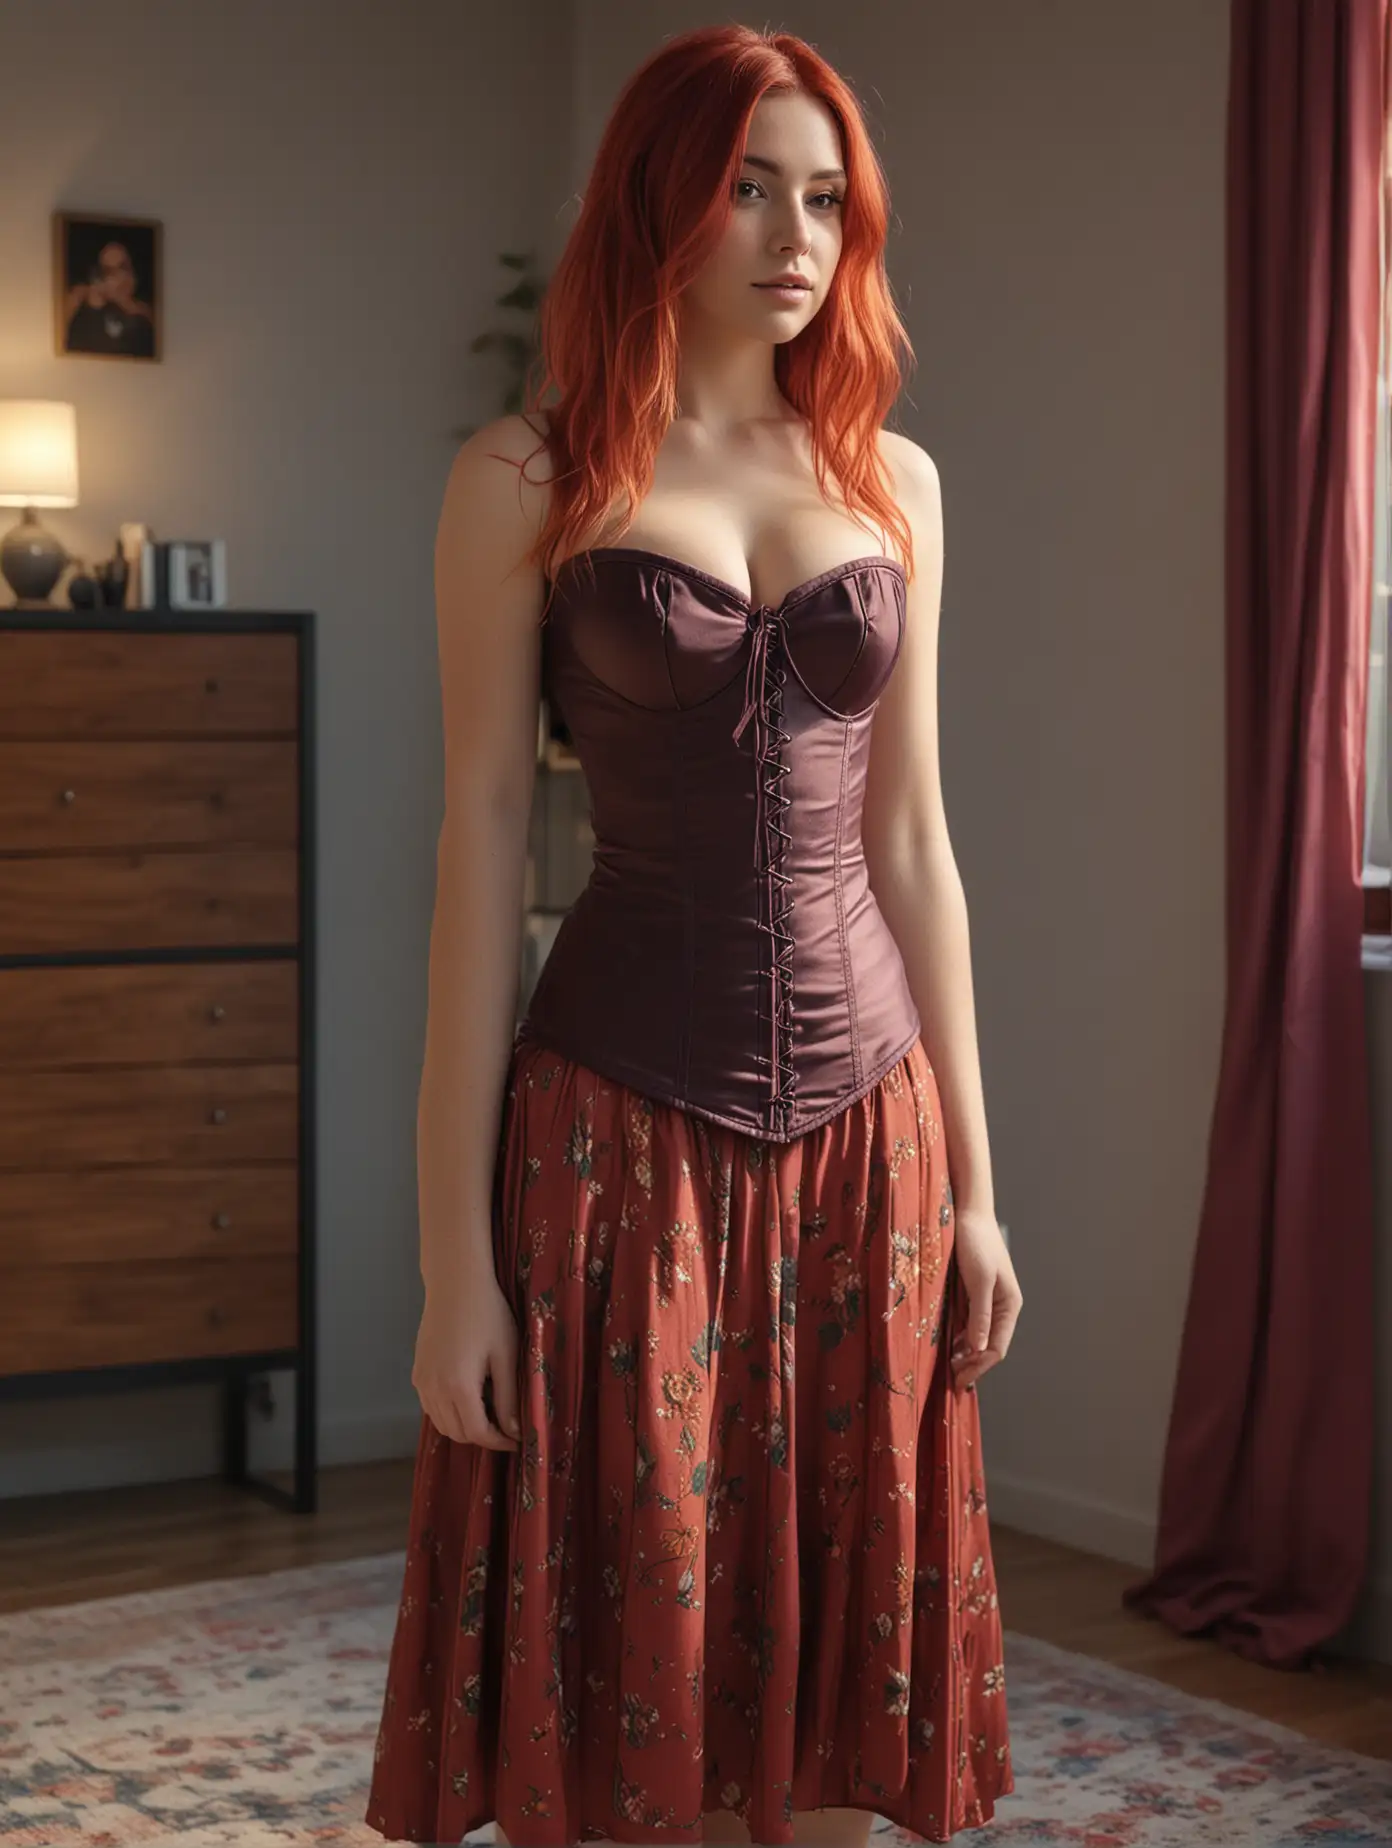 (distance),(((front view perspective))), create a realistic 3d image of a woman with long multicolored hair, she is wearing a long fitted maroon midi skirt and a multicolored corset, her hands are on her waist, she is in a living room,((perfect female body, narrow waist, wide hips)), 8k uhd, dslr, soft lighting, high quality, film grain, Fujifilm XT3,  Ultra-detail, Real, Photorealistic, High-definition face drawing, RAW photo